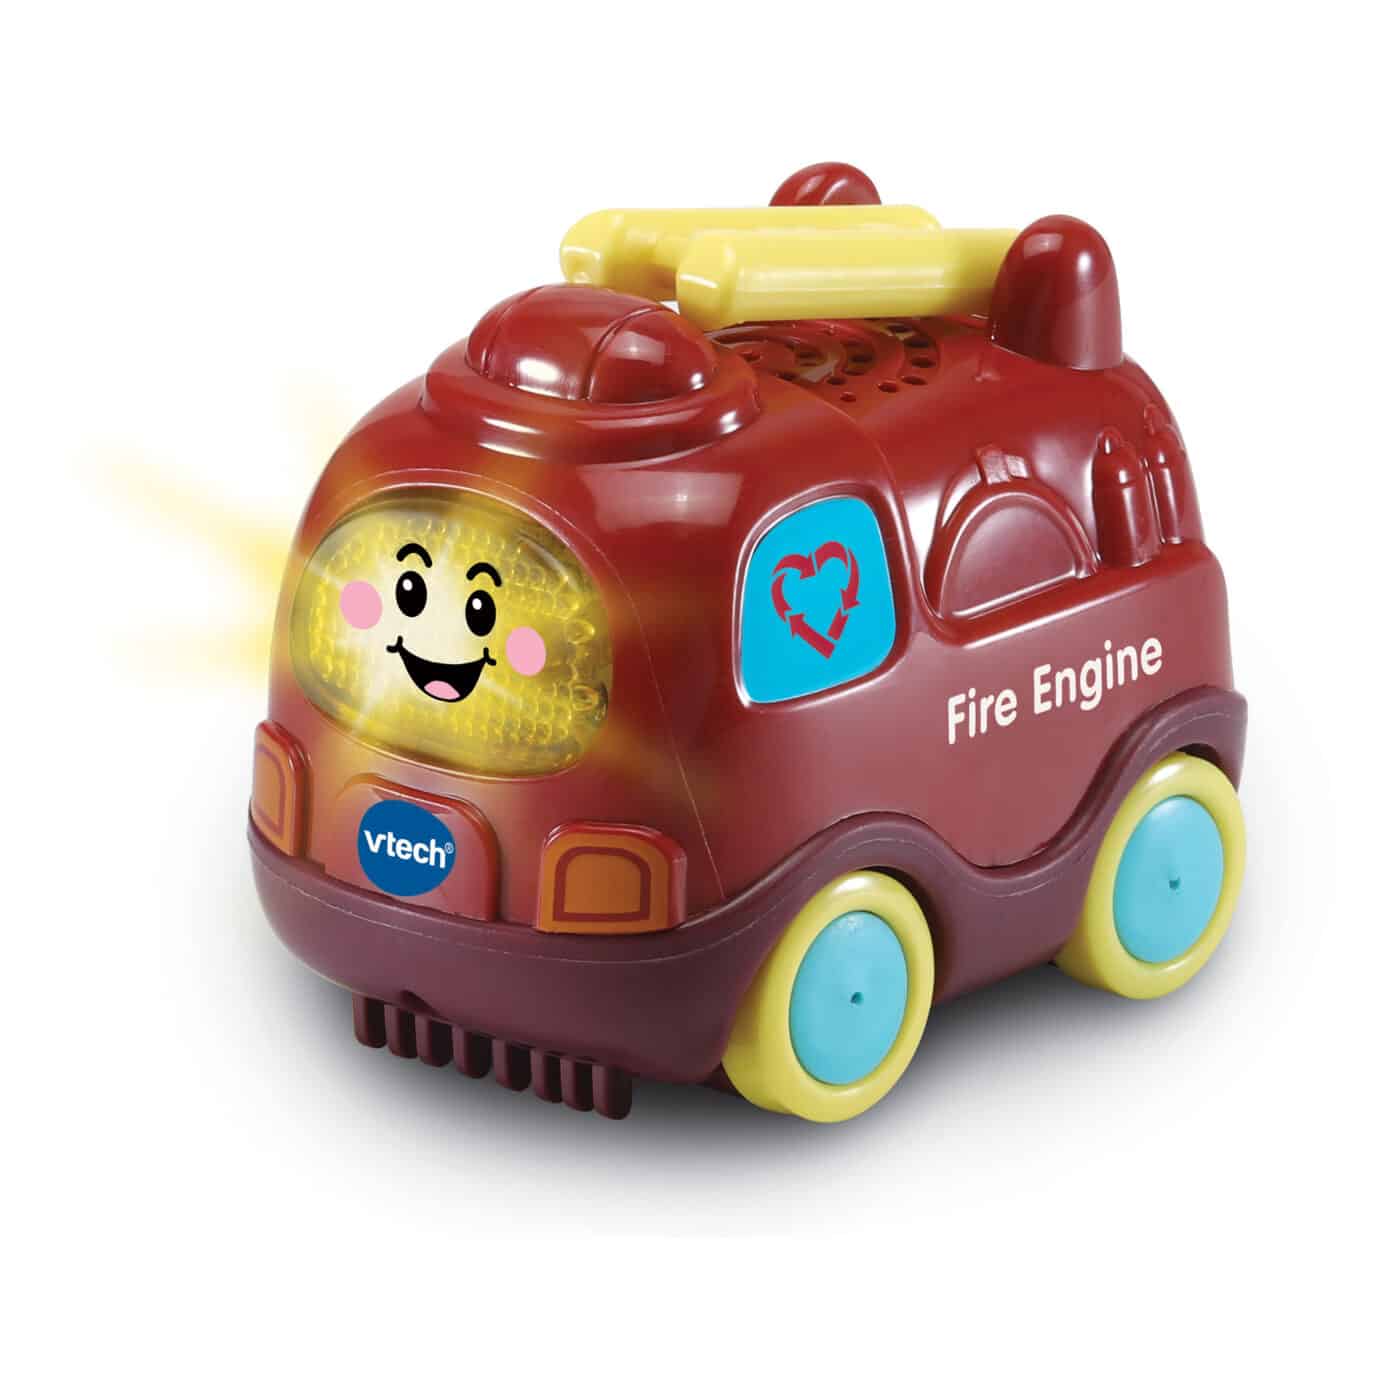 Vtech Toot Toot Drivers Vehicle Special Edition - Fire Engine